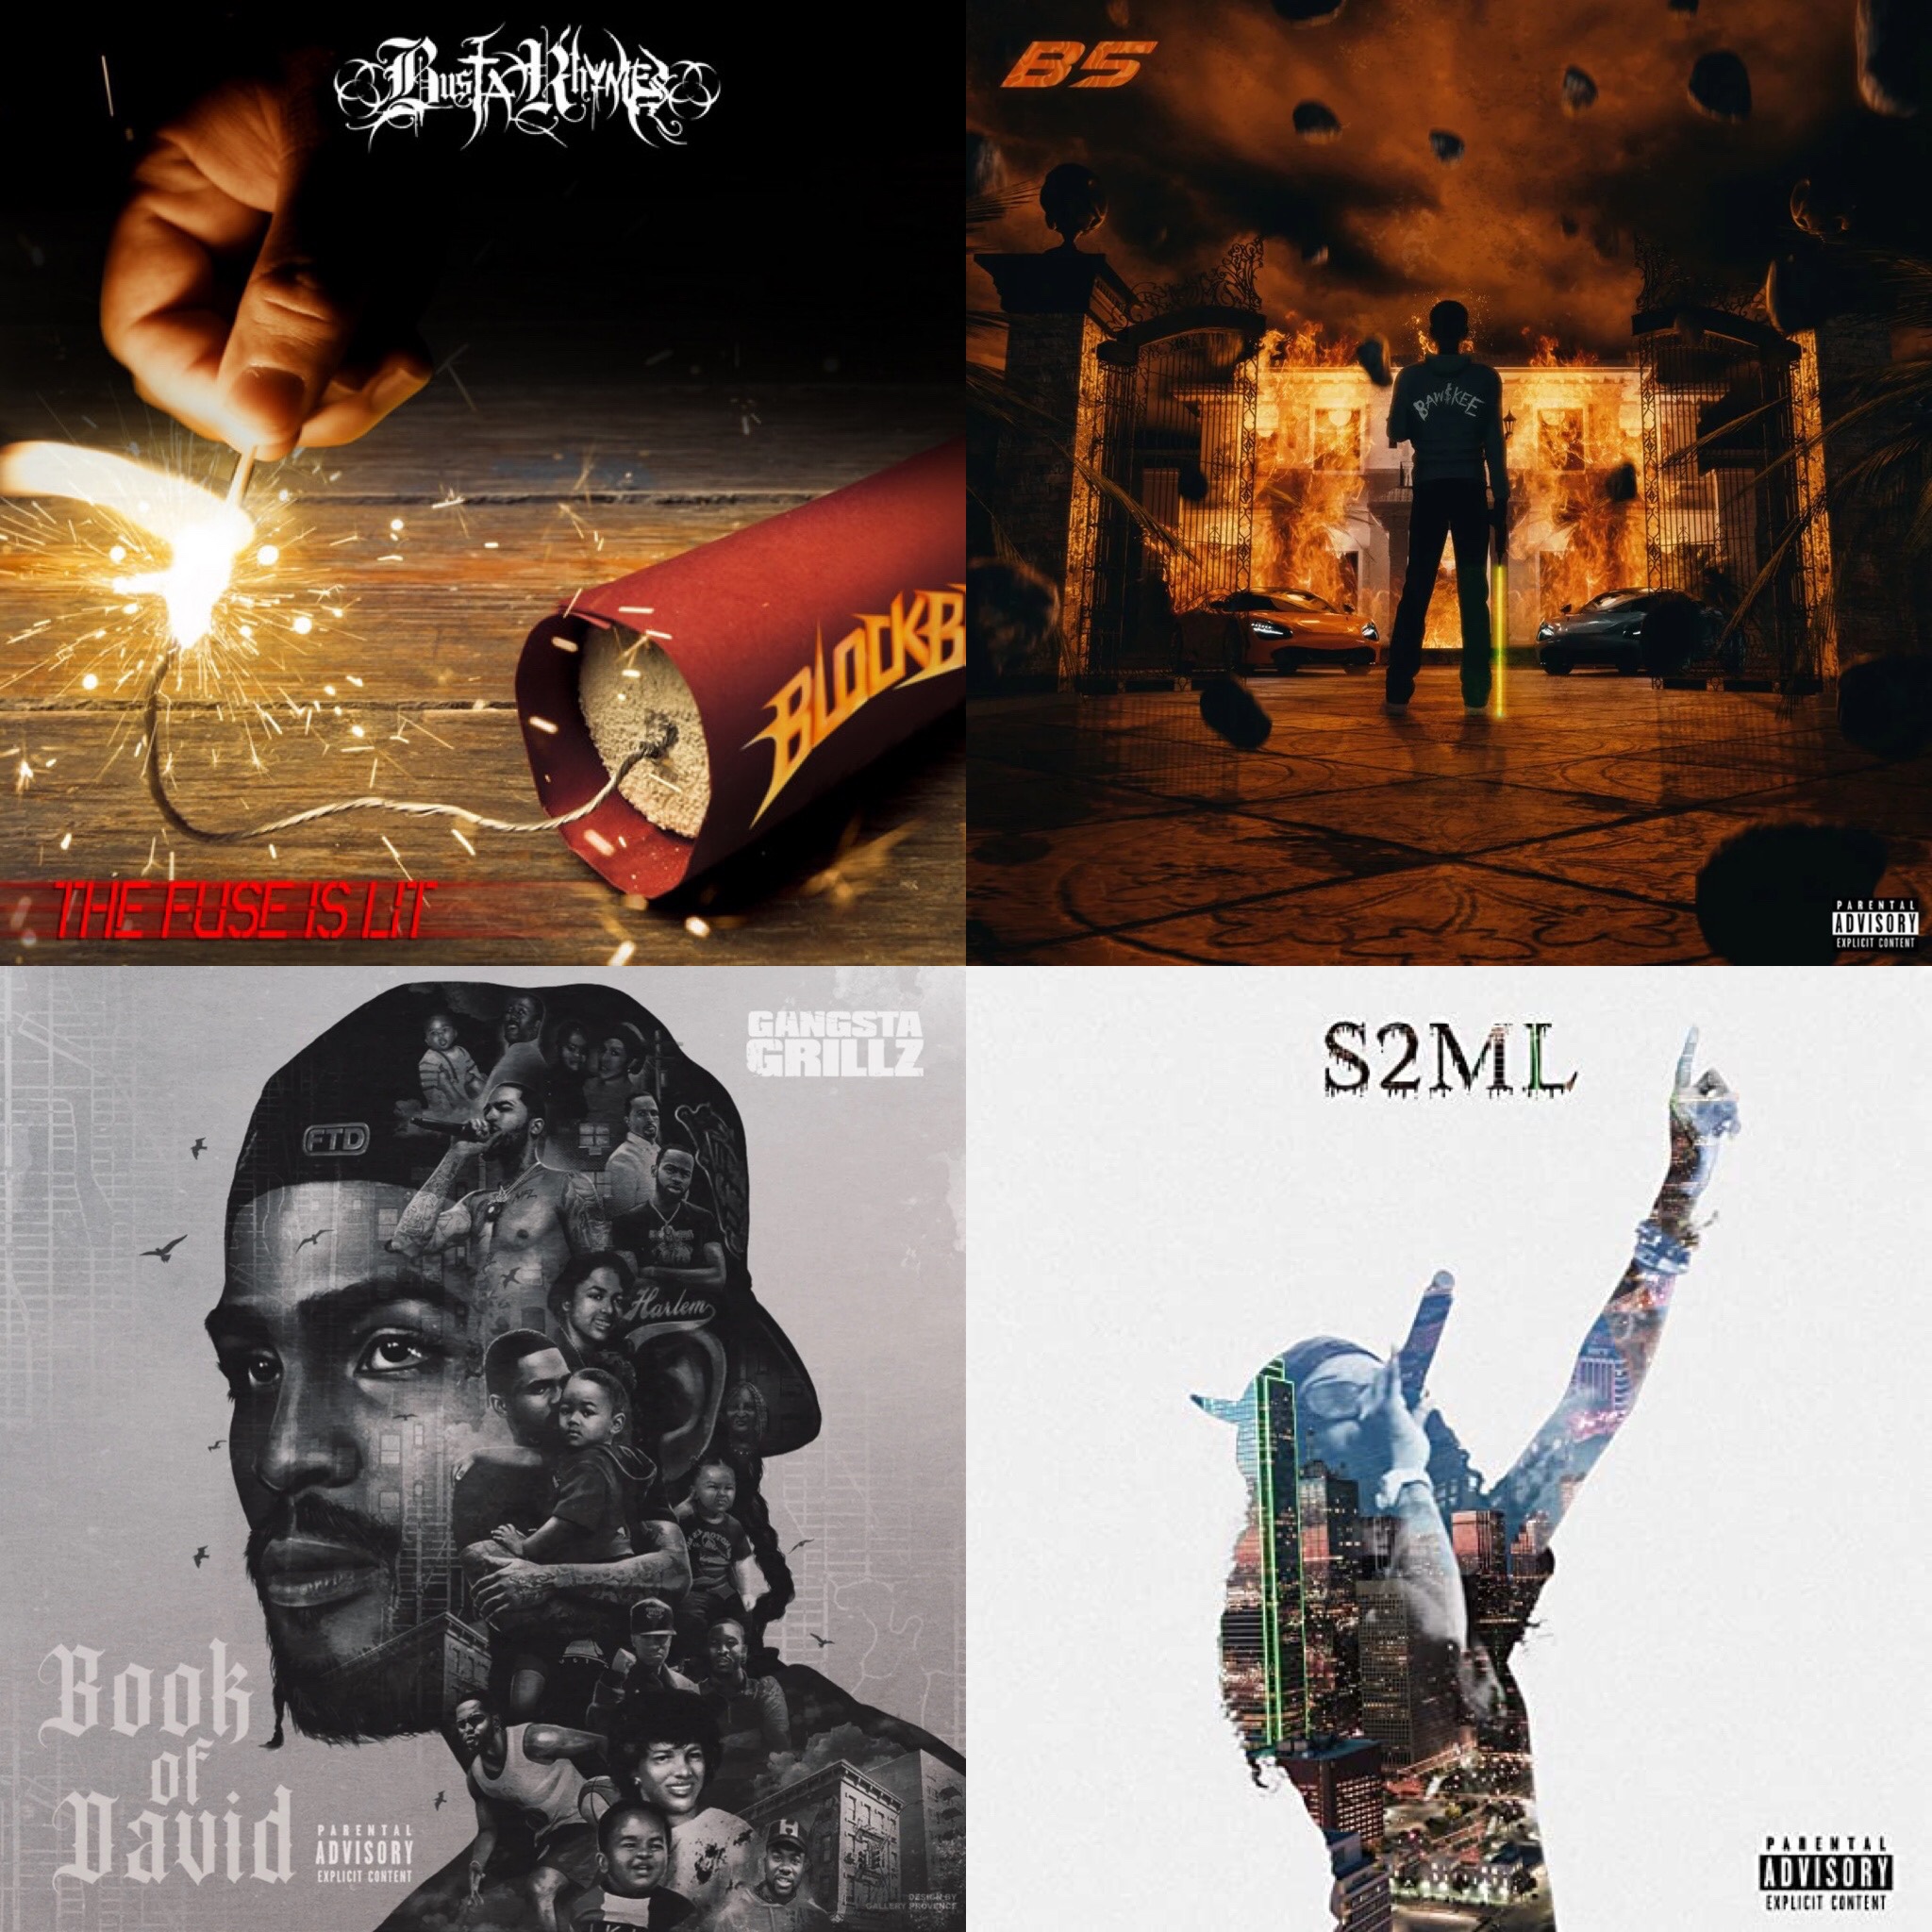 ICYMI: Top 5 Underrated Albums From Last Week (Episode 2): Dave East, Comethazine, Busta Rhymes & More